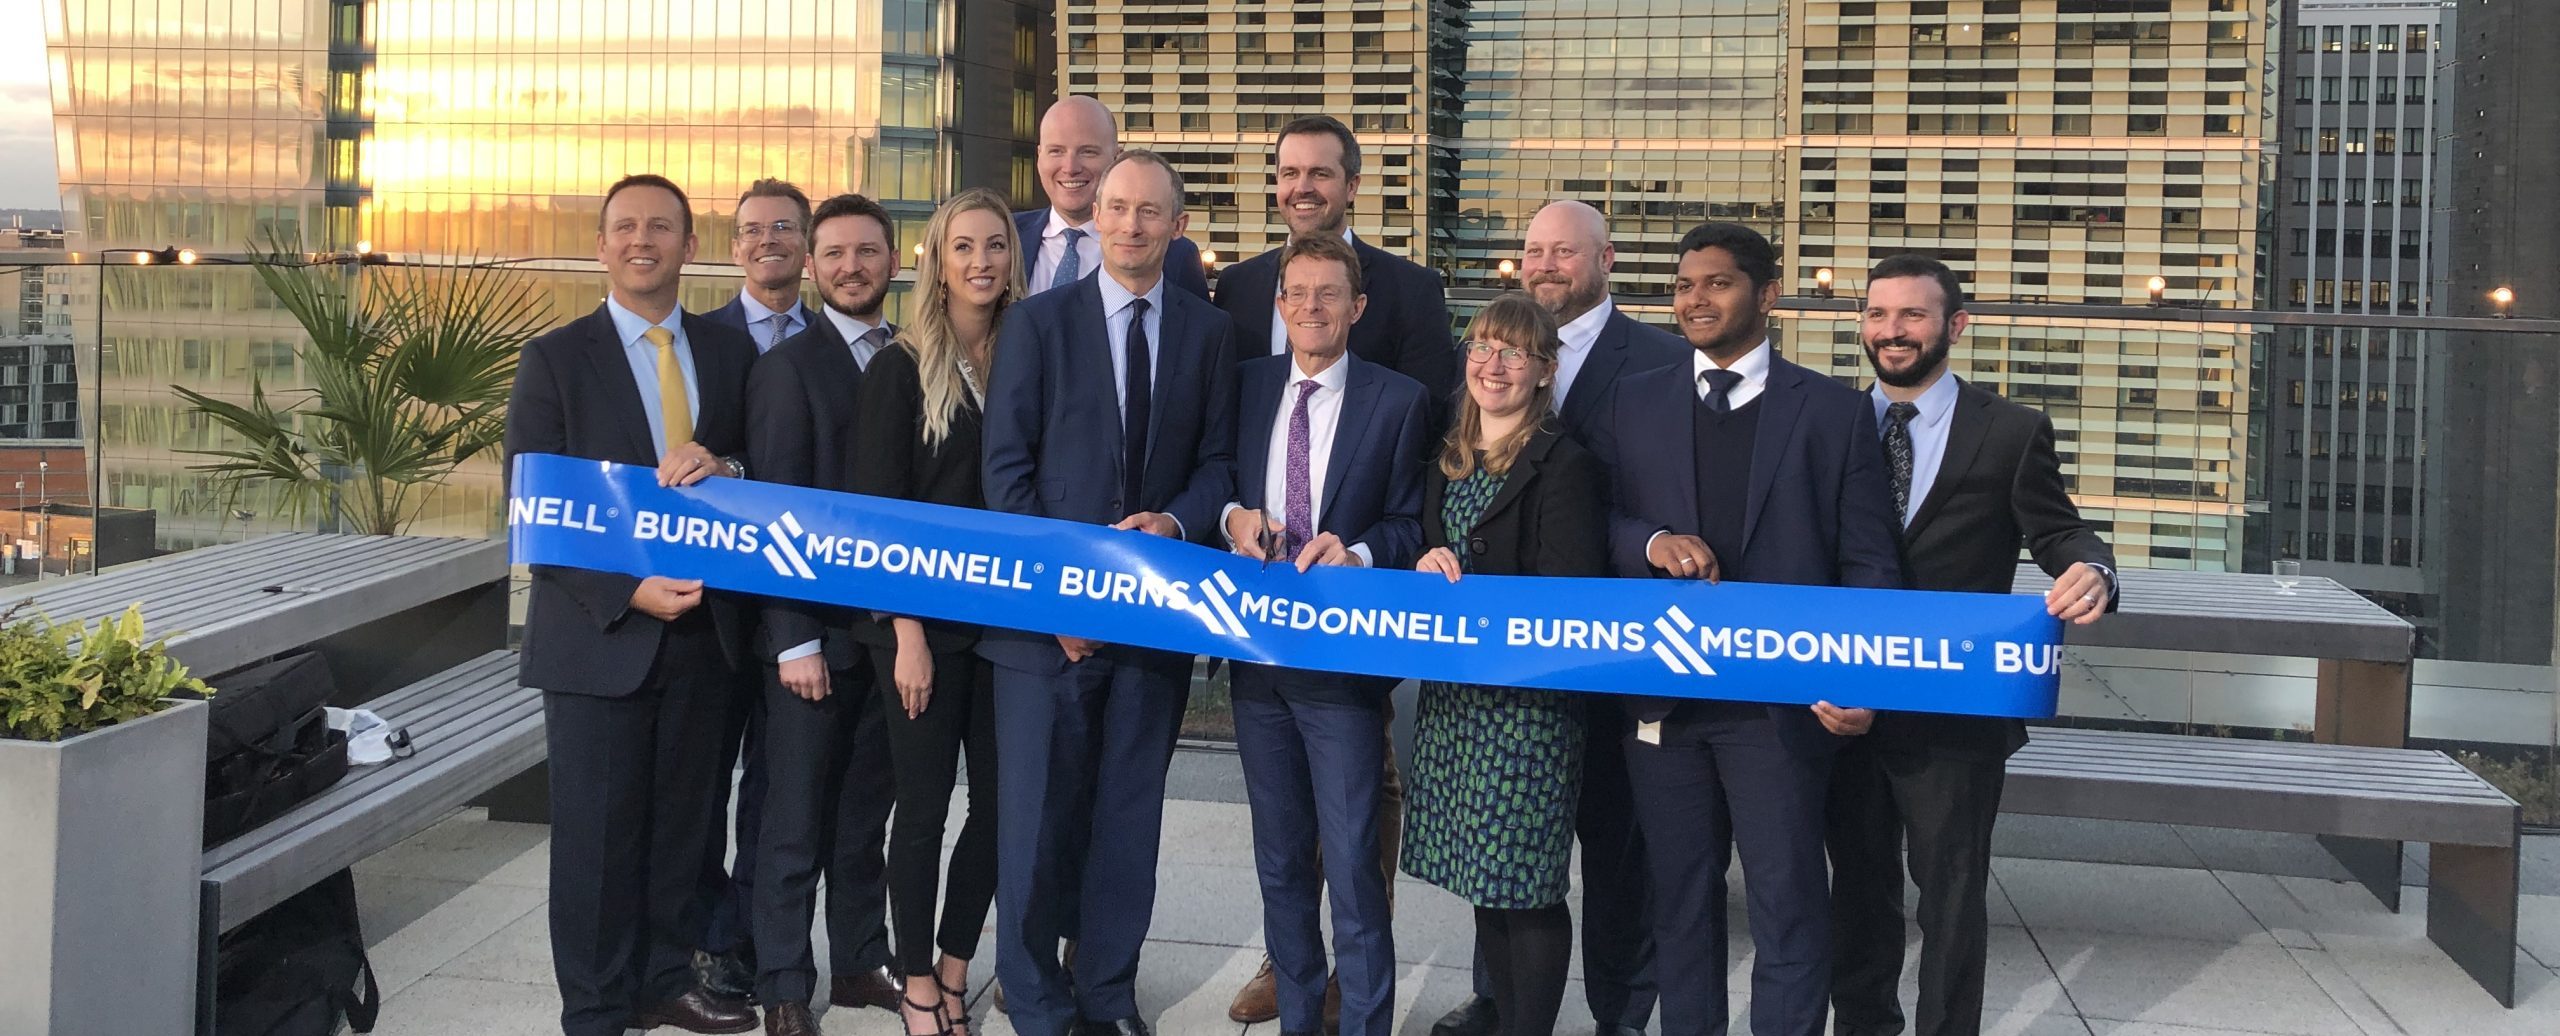 Burns & McDonnell cutting the ribbon outside their new offices.